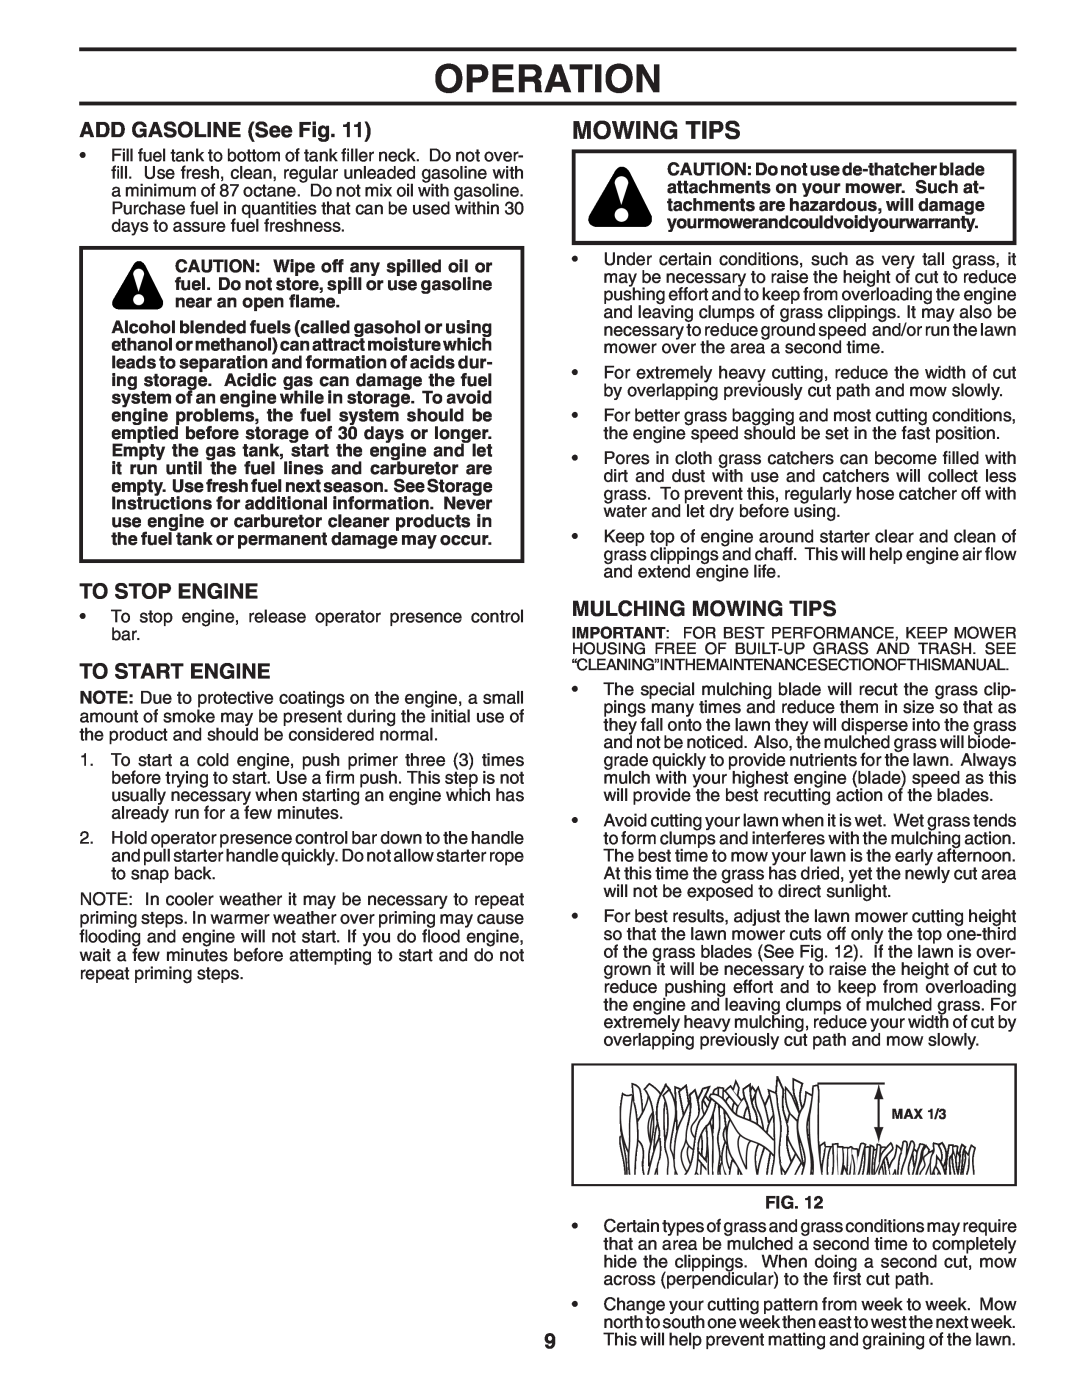 Husqvarna 87521RSX owner manual ADD GASOLINE See Fig, To Stop Engine, To Start Engine, Mulching Mowing Tips, Operation 